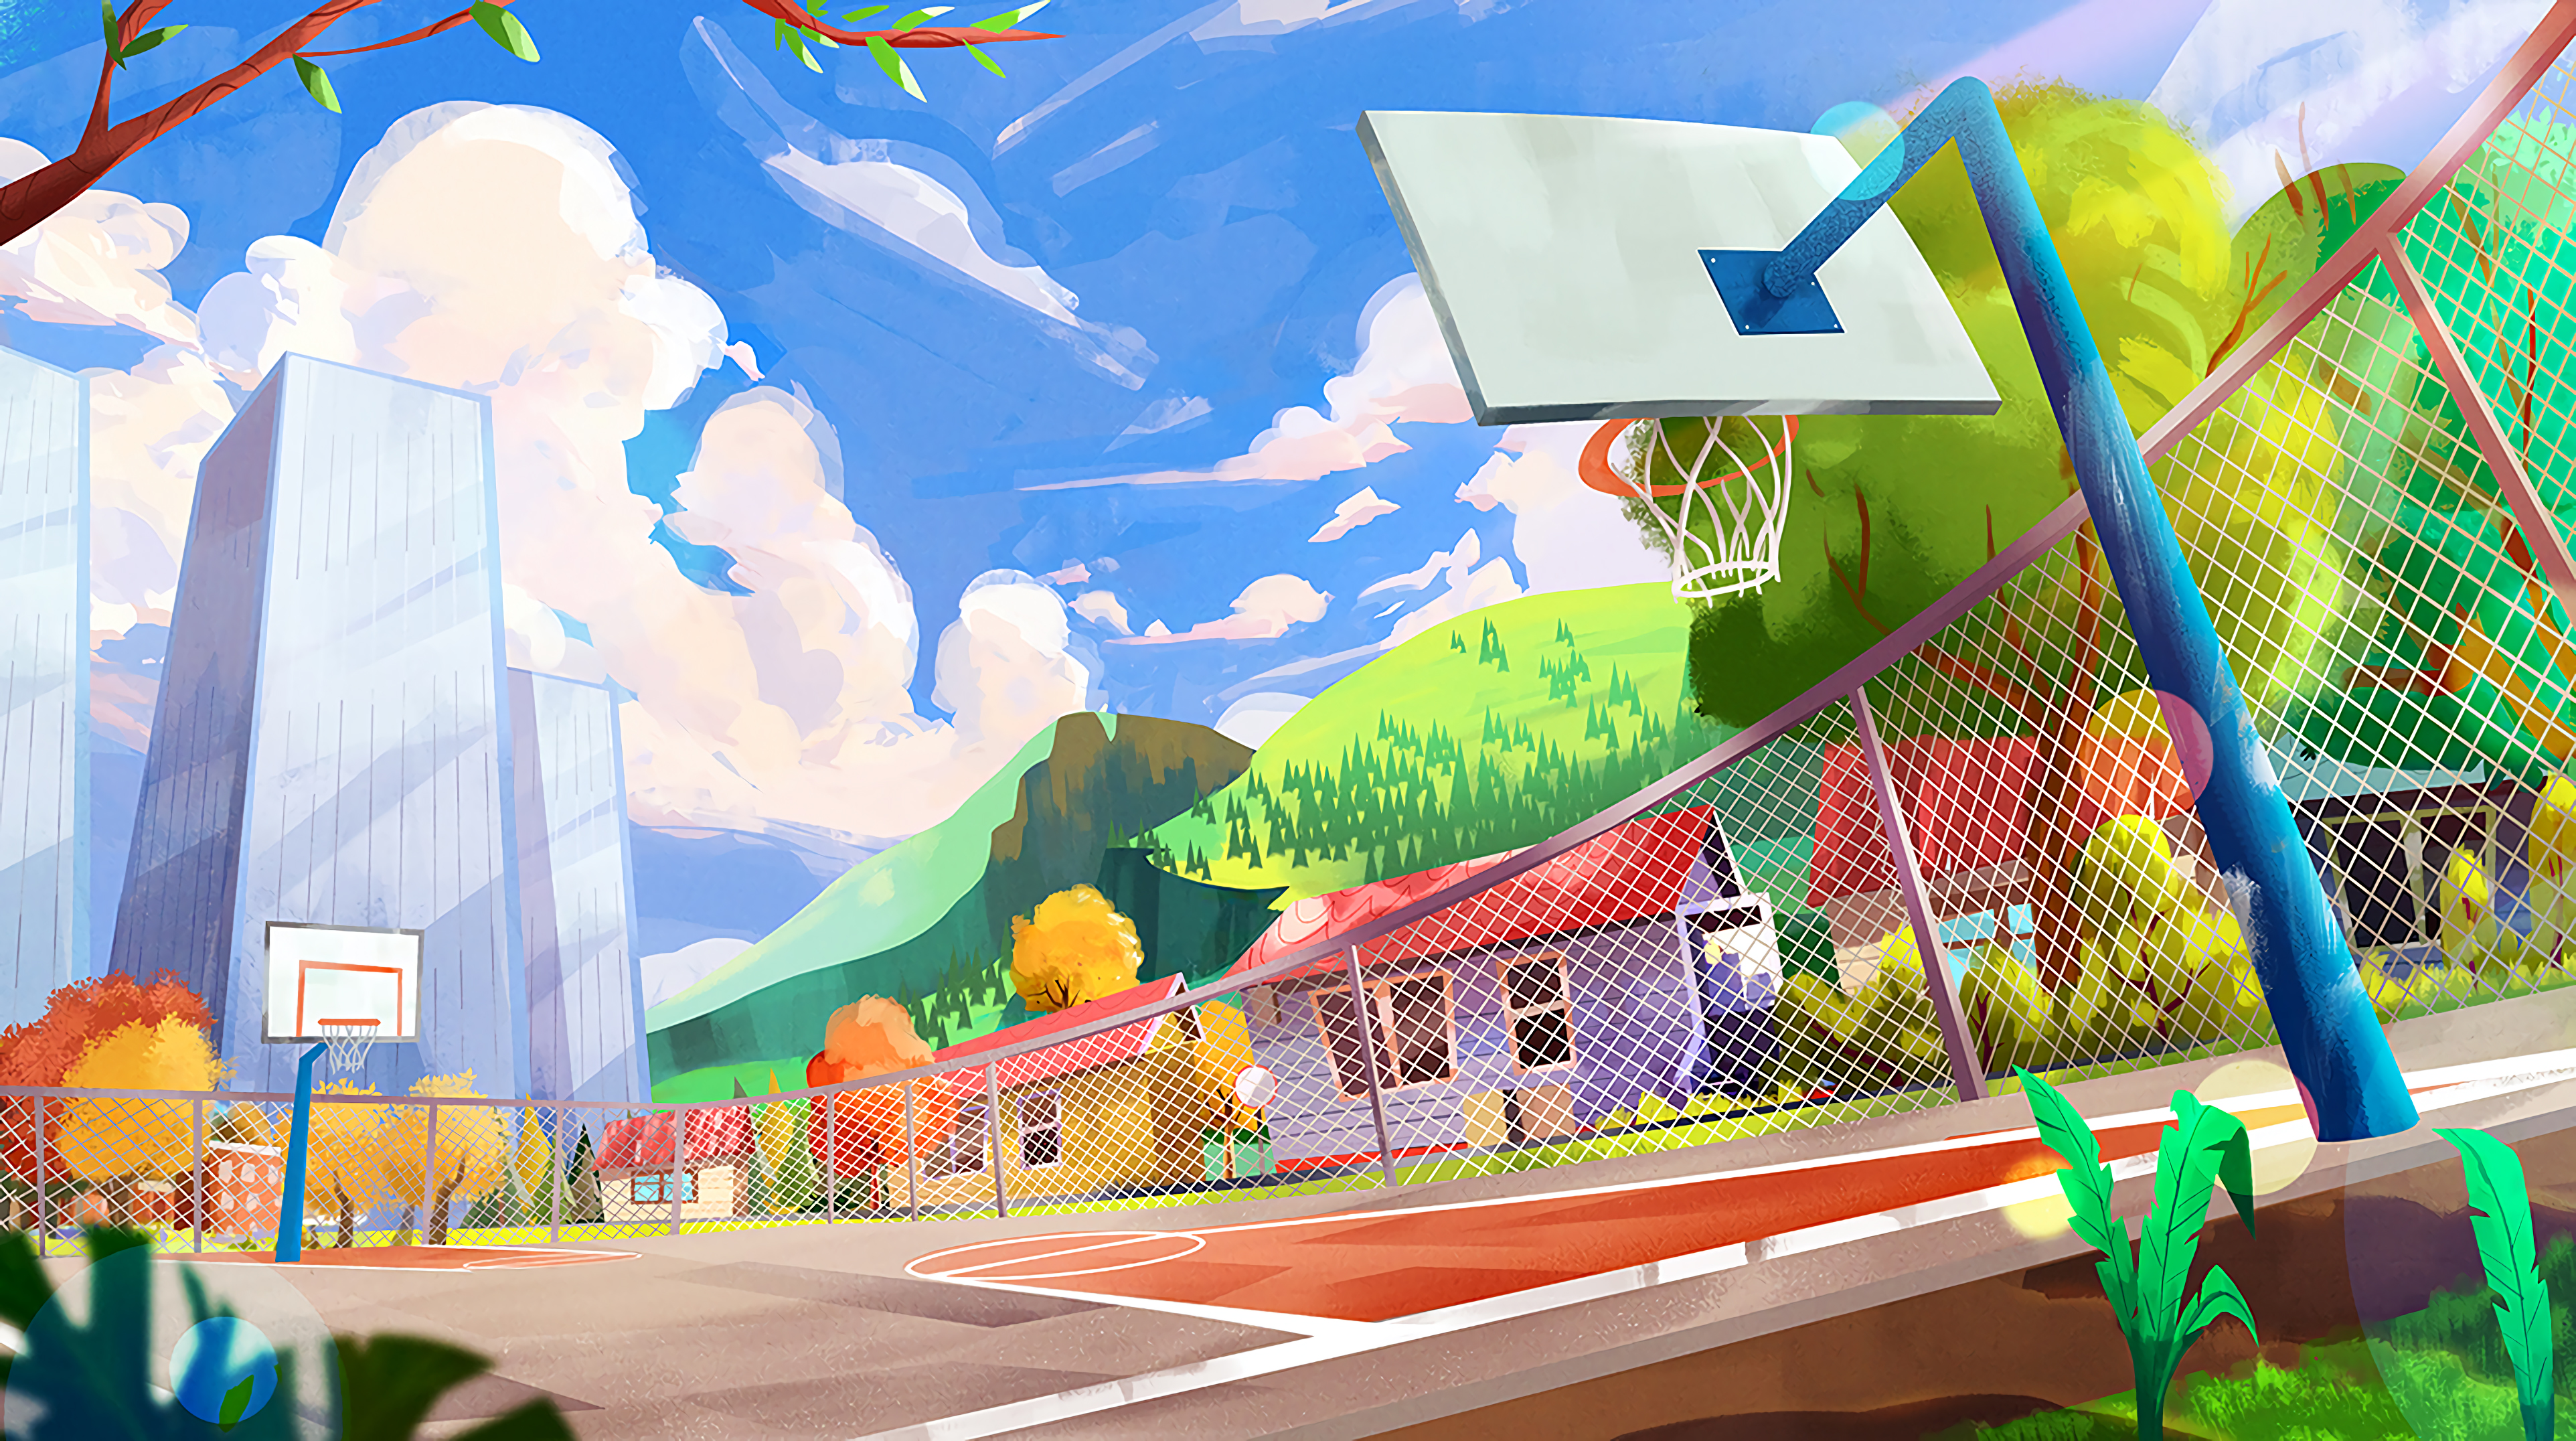 basketball hoop, playground, city, colorful, art, colourful, basketball ring, sports ground Image for desktop